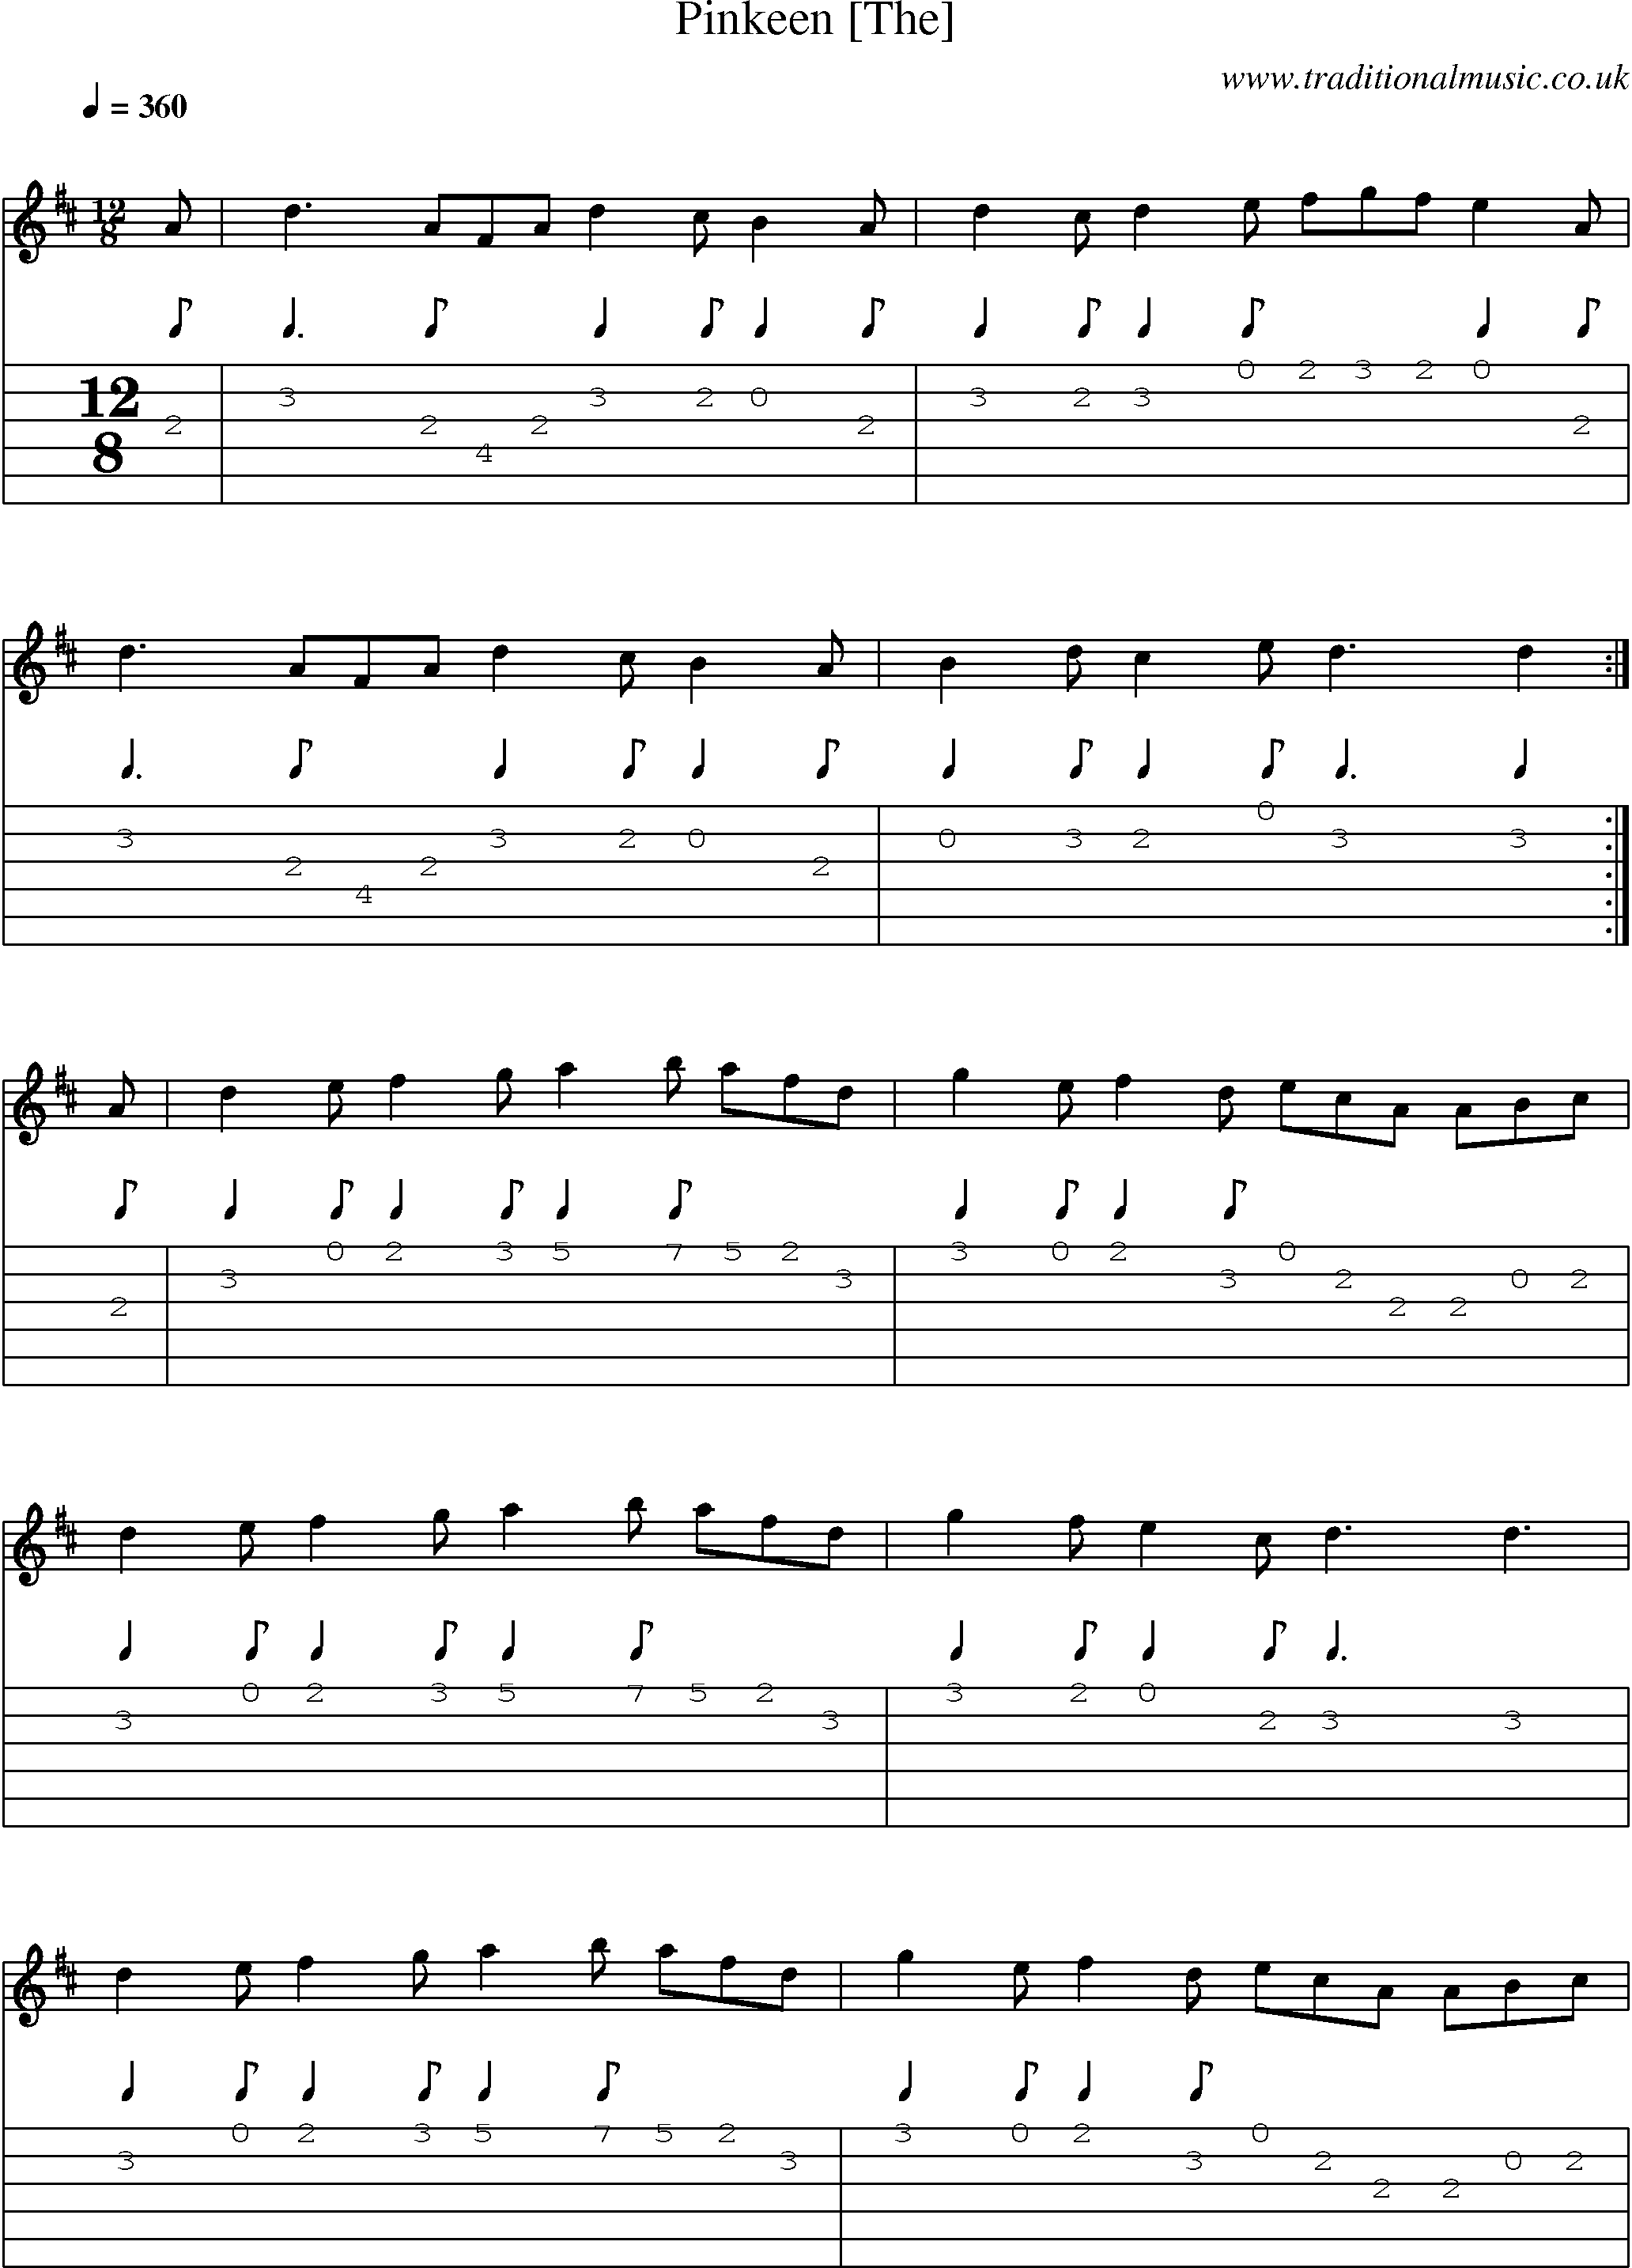 Music Score and Guitar Tabs for Pinkeen